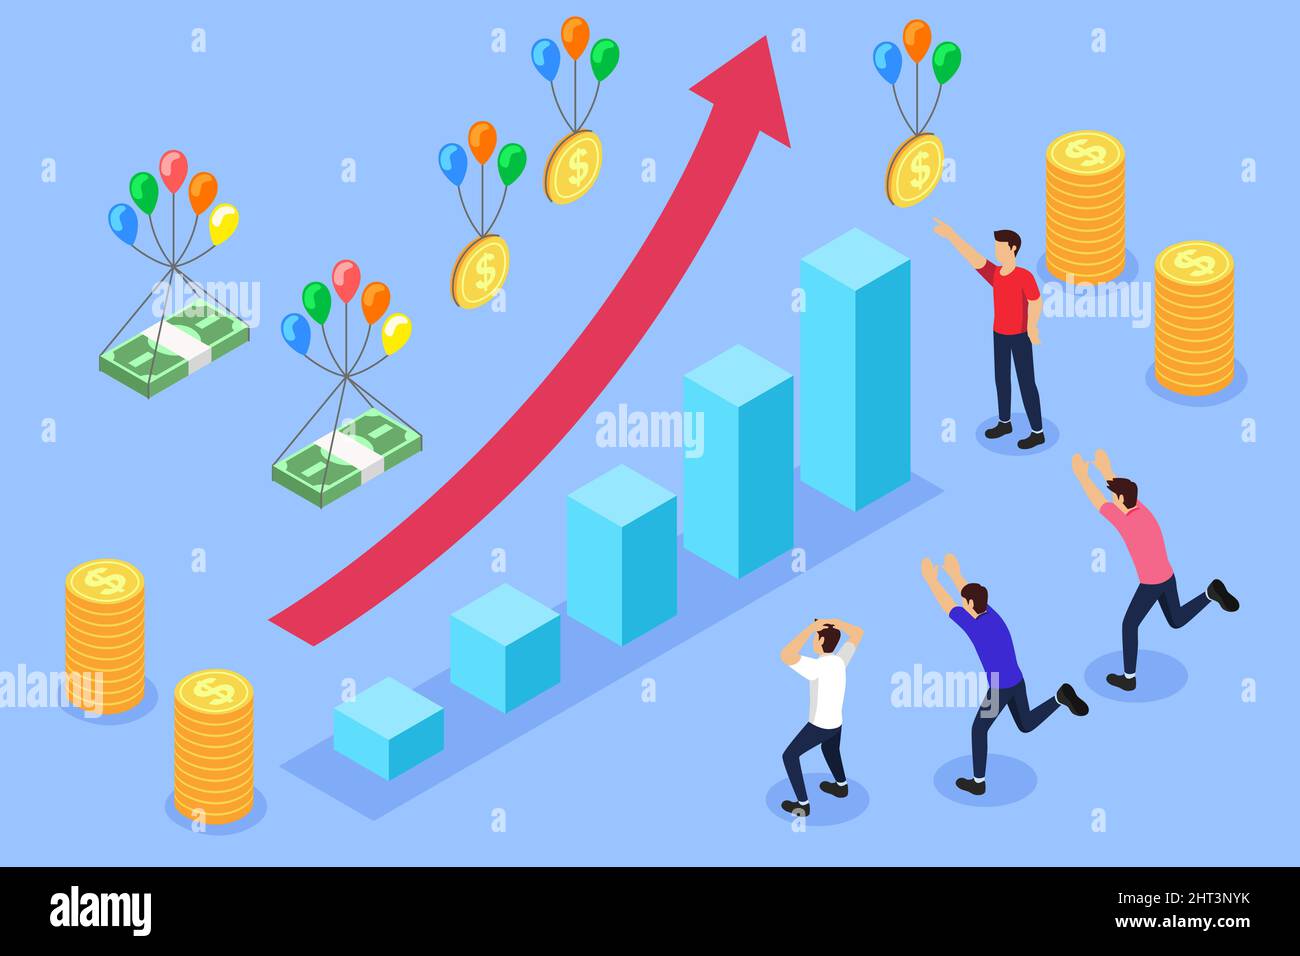 A vector illustration of Inflation Economy Business Finance Concept Stock Vector